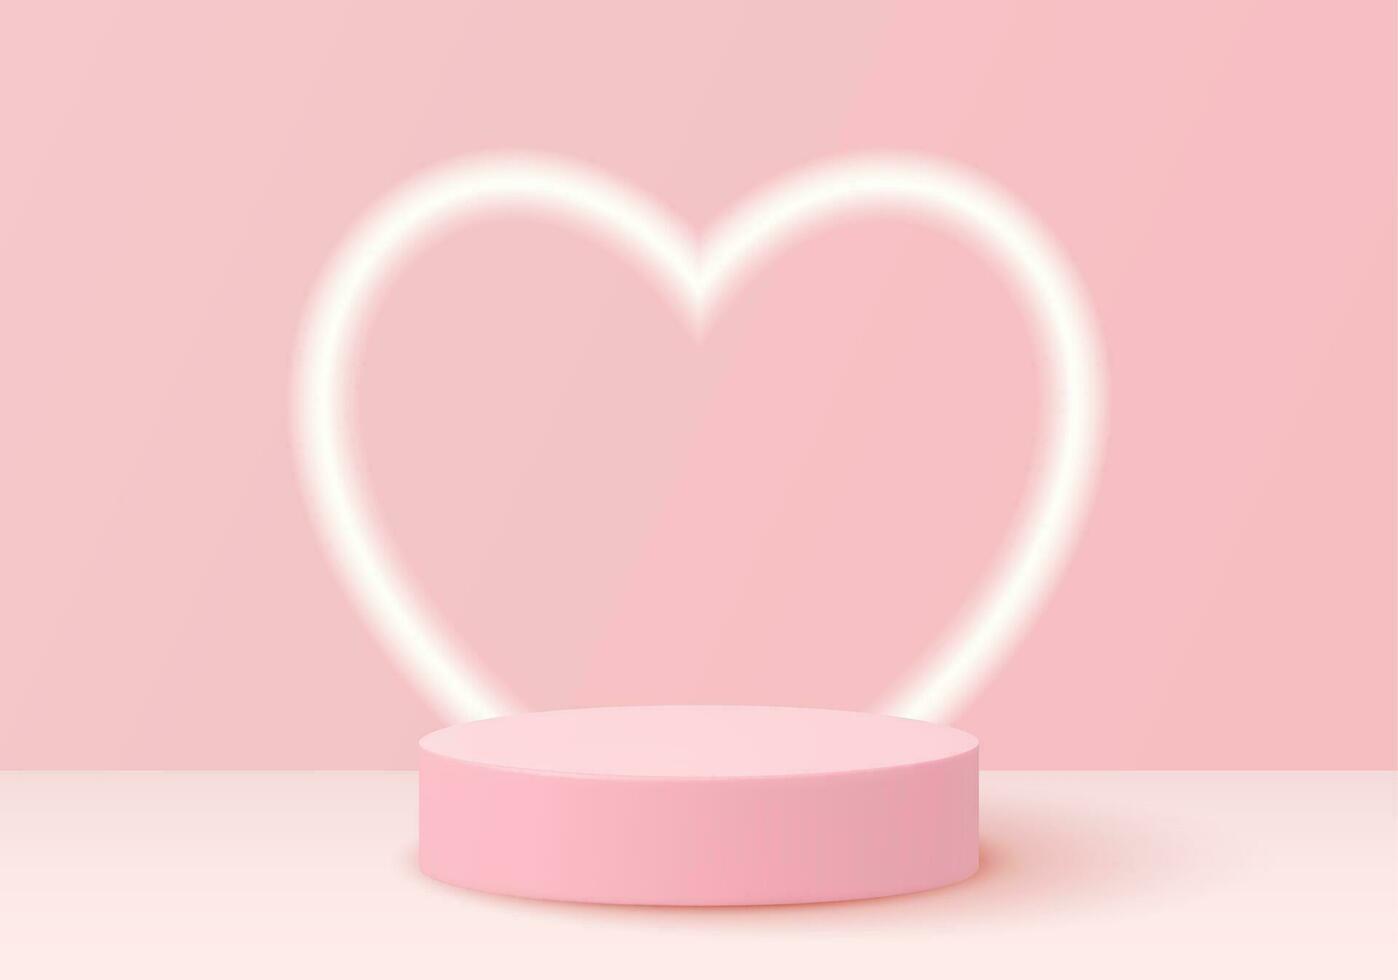 mock up Stage podium decorated with heart shape lighting. Pedestal scene with for product, advertising, show, on light pink background. Valentine concept. Vector illustration